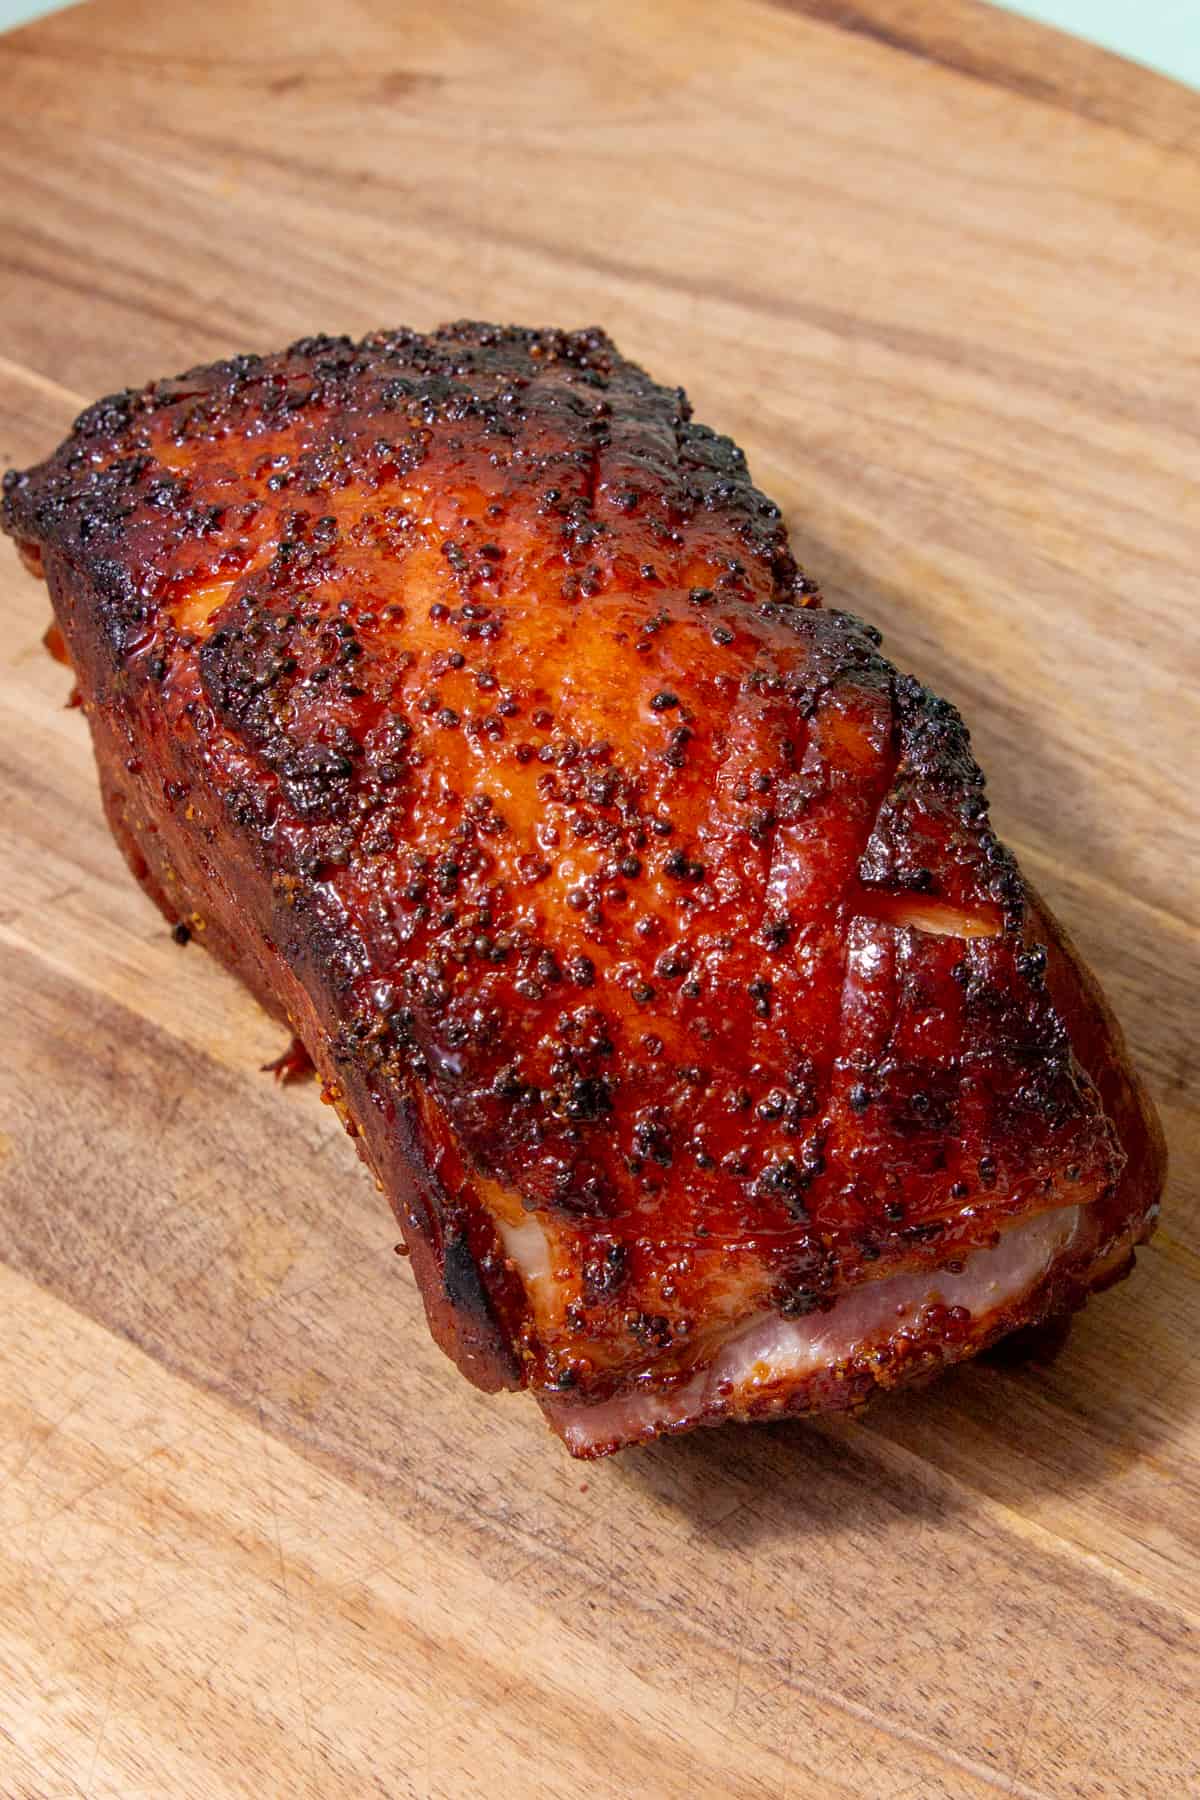 Roasted ham with dark brown glazed topping on a wooden board.